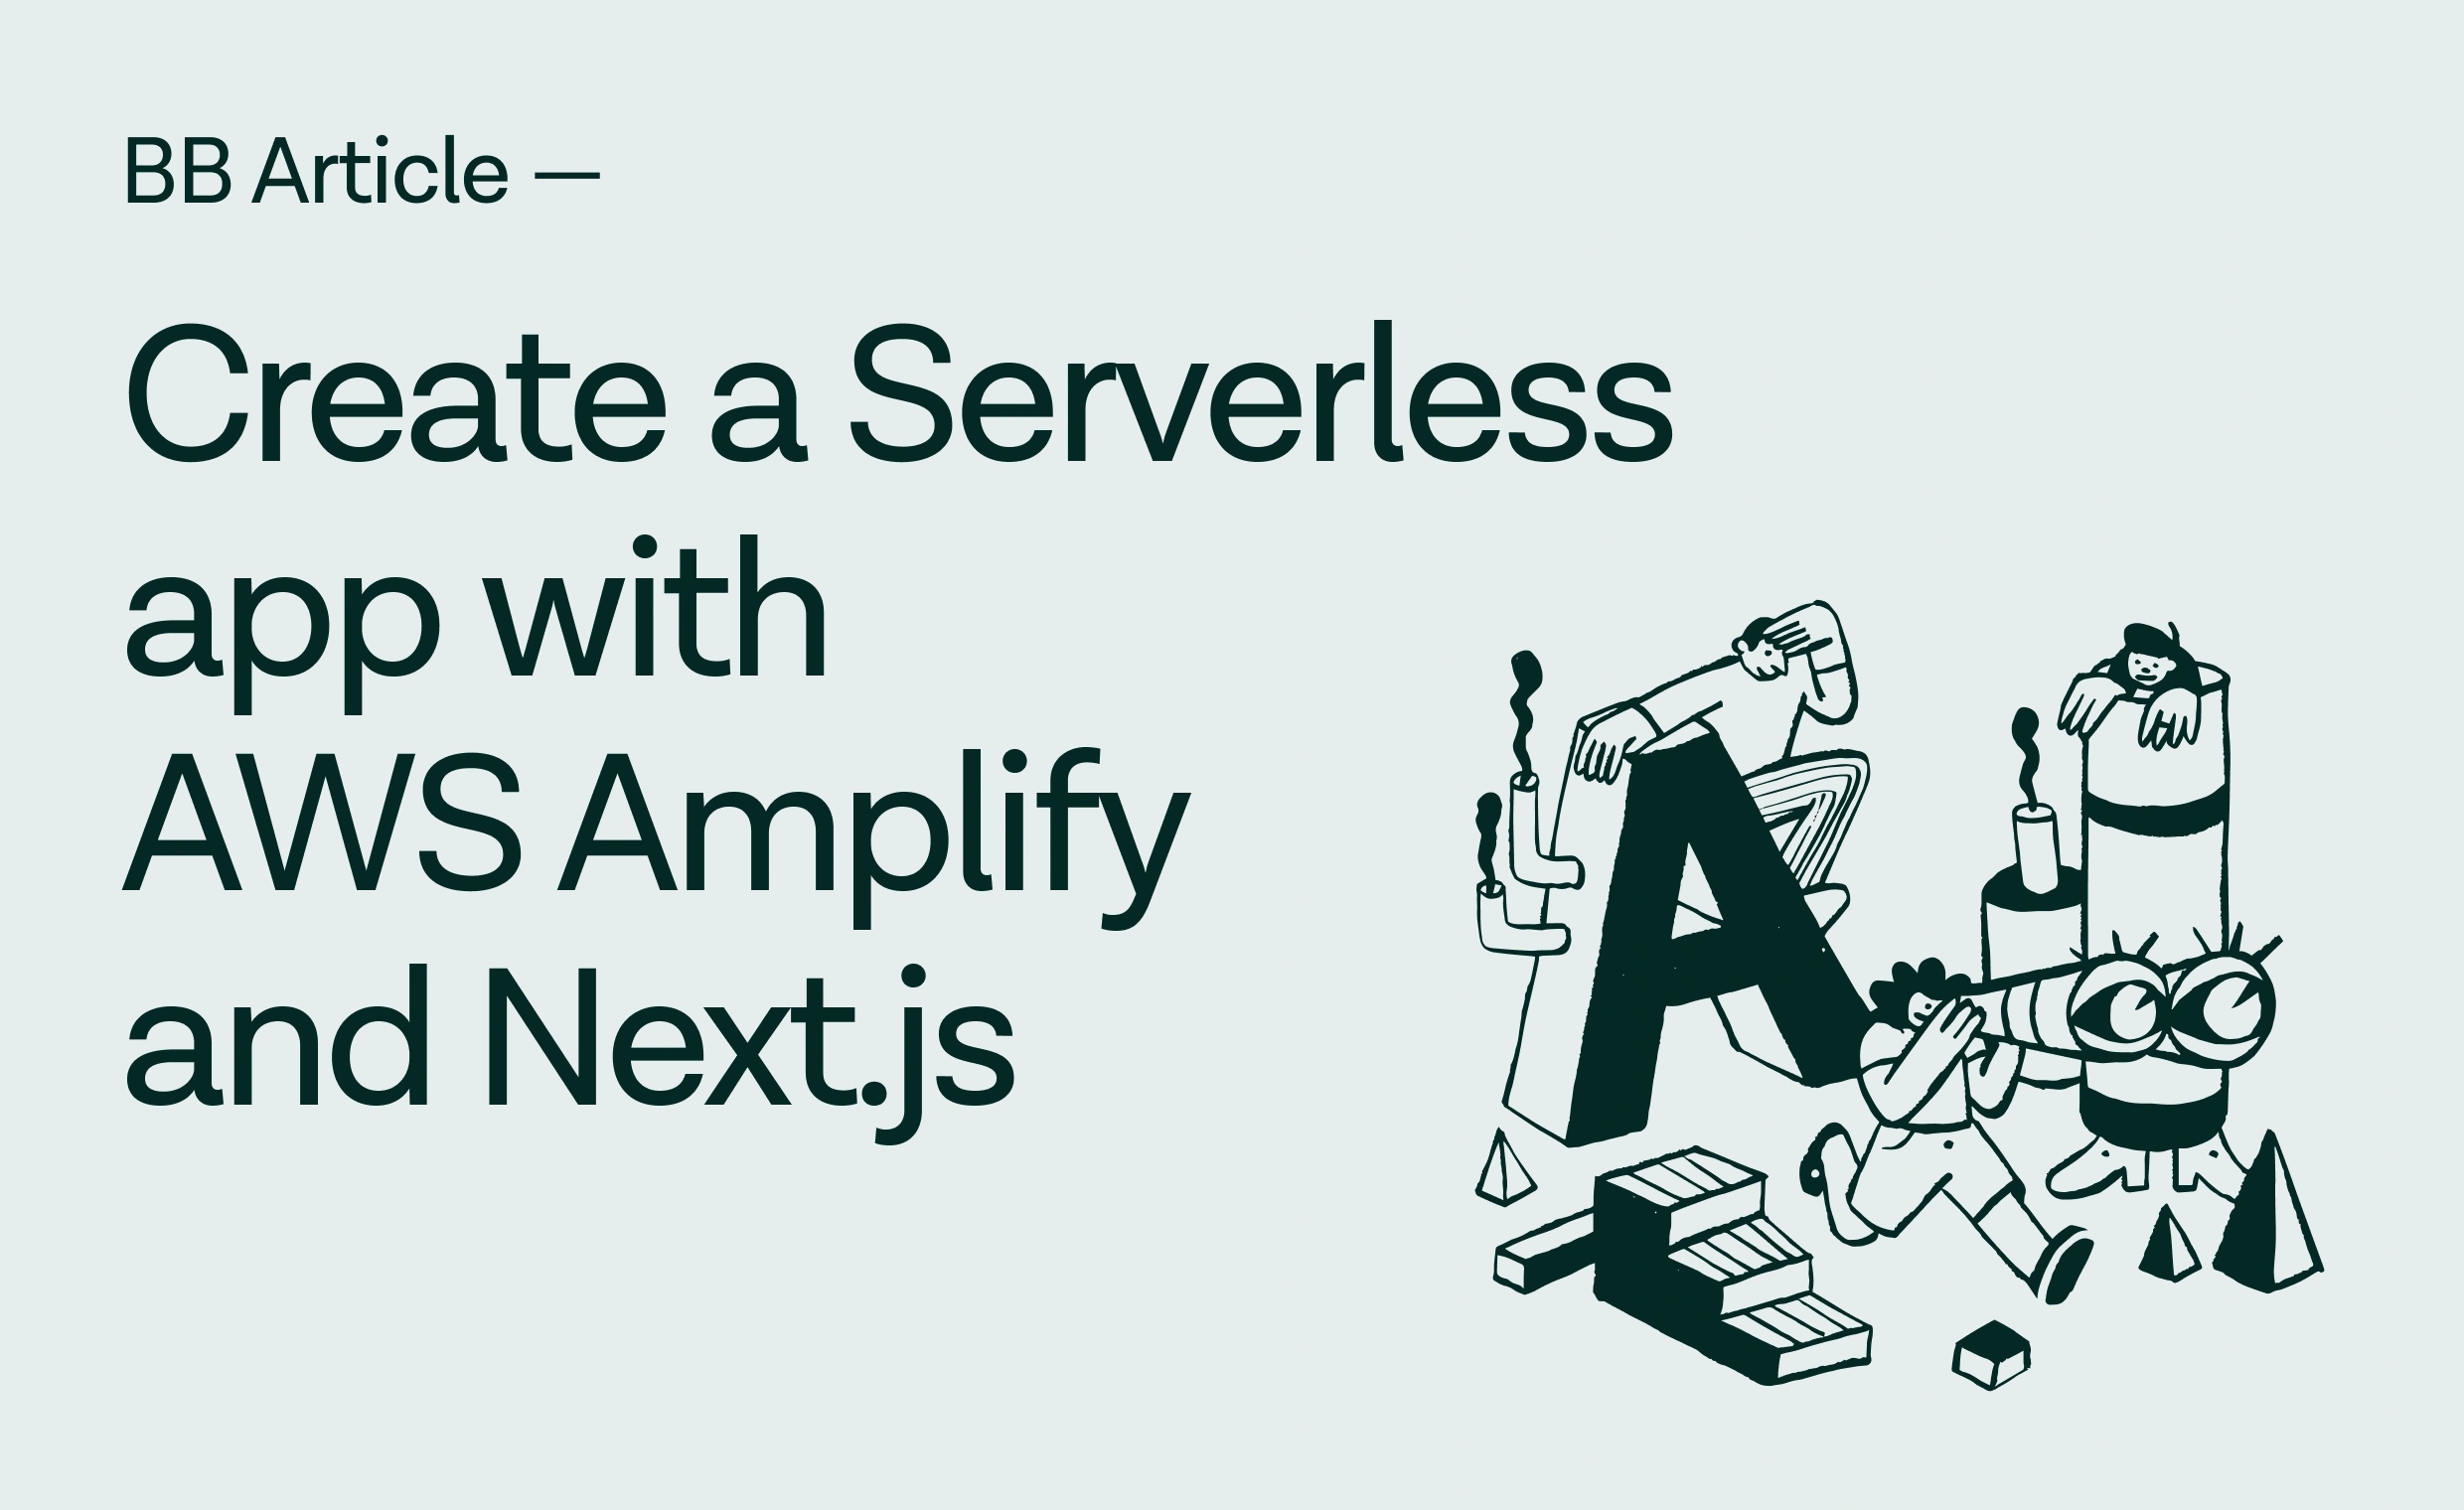 Create a serverless app with AWS Amplify and Next.js article visual